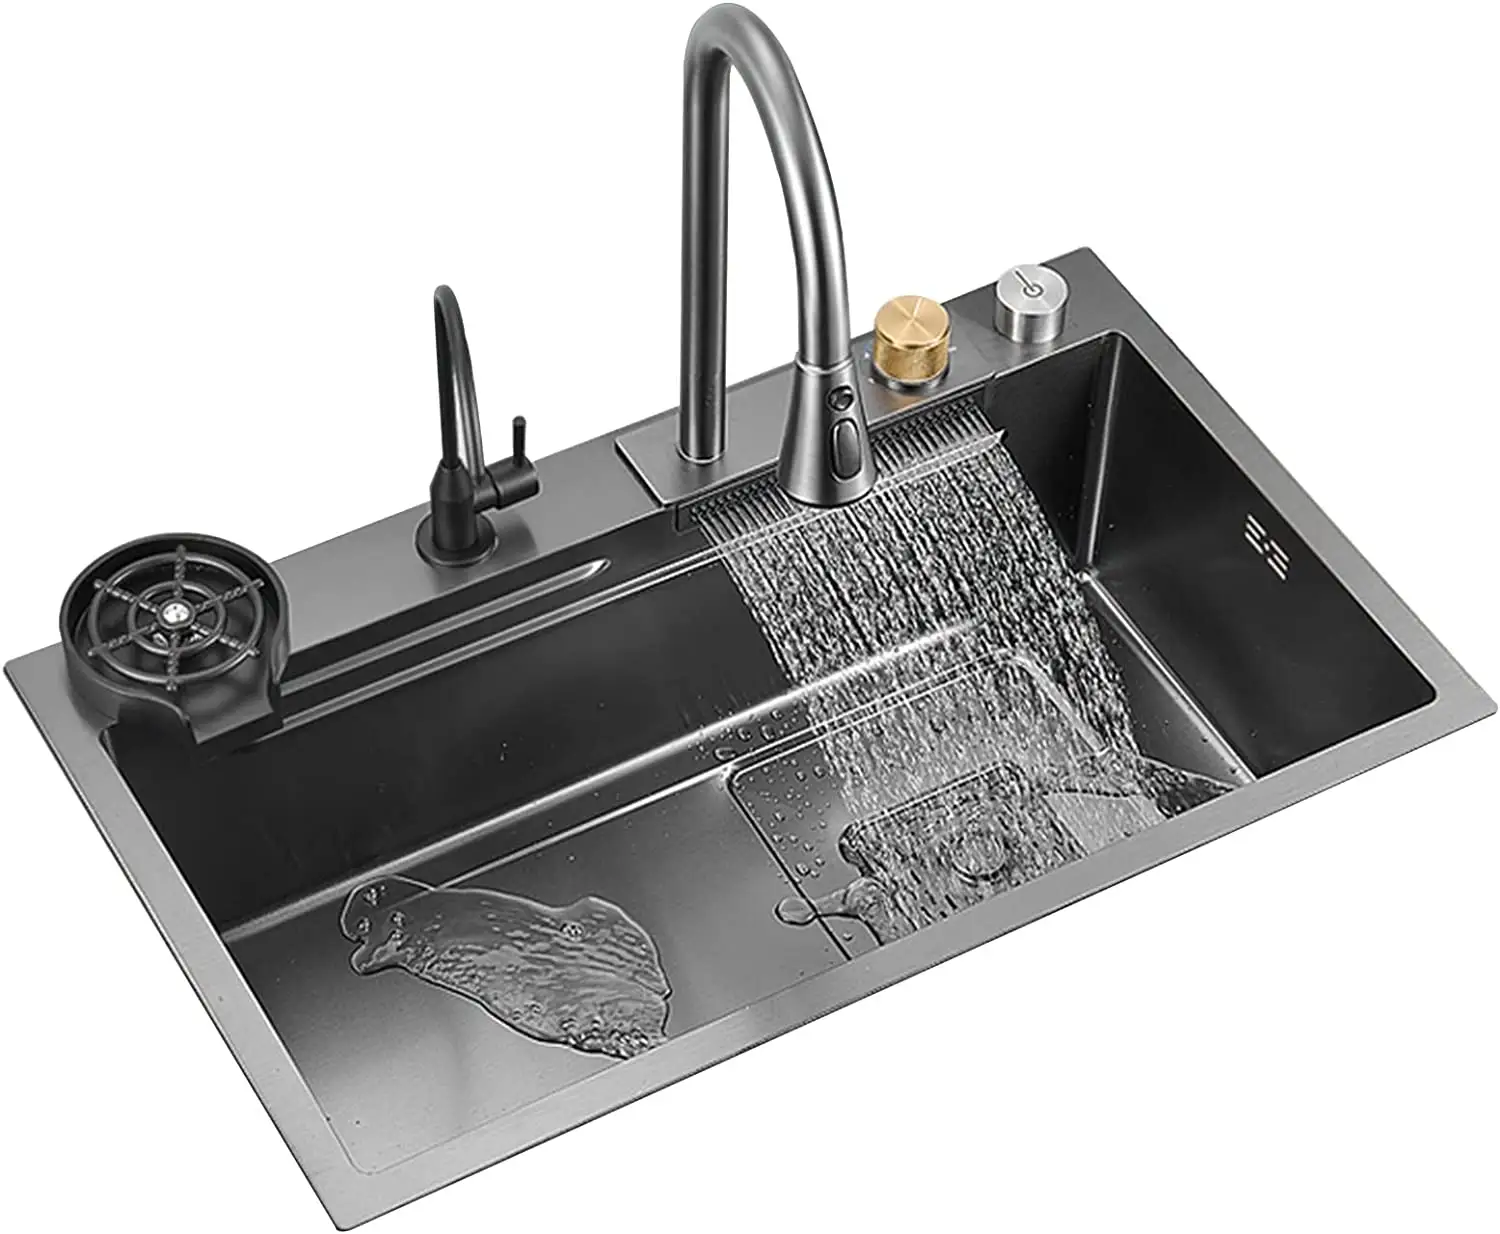 32 Inch Black Faucet Stainless Steel Sink Waterfall Spout Large Single Bowl Kitchen Sink With Auto Drainage